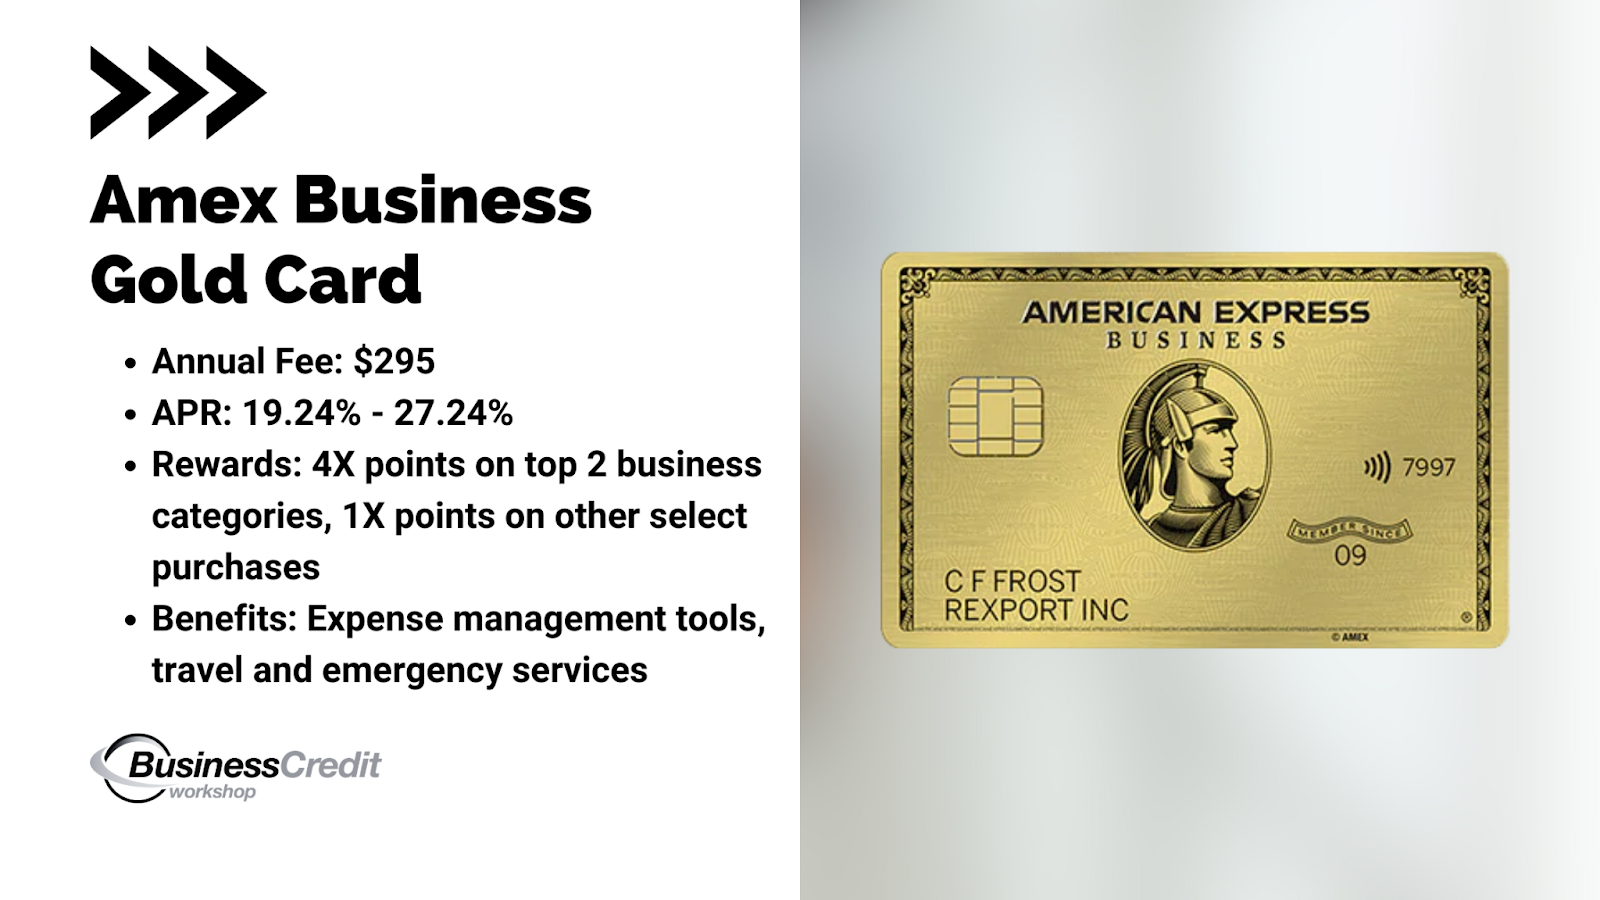 Best business credit cards for new business (Amex)